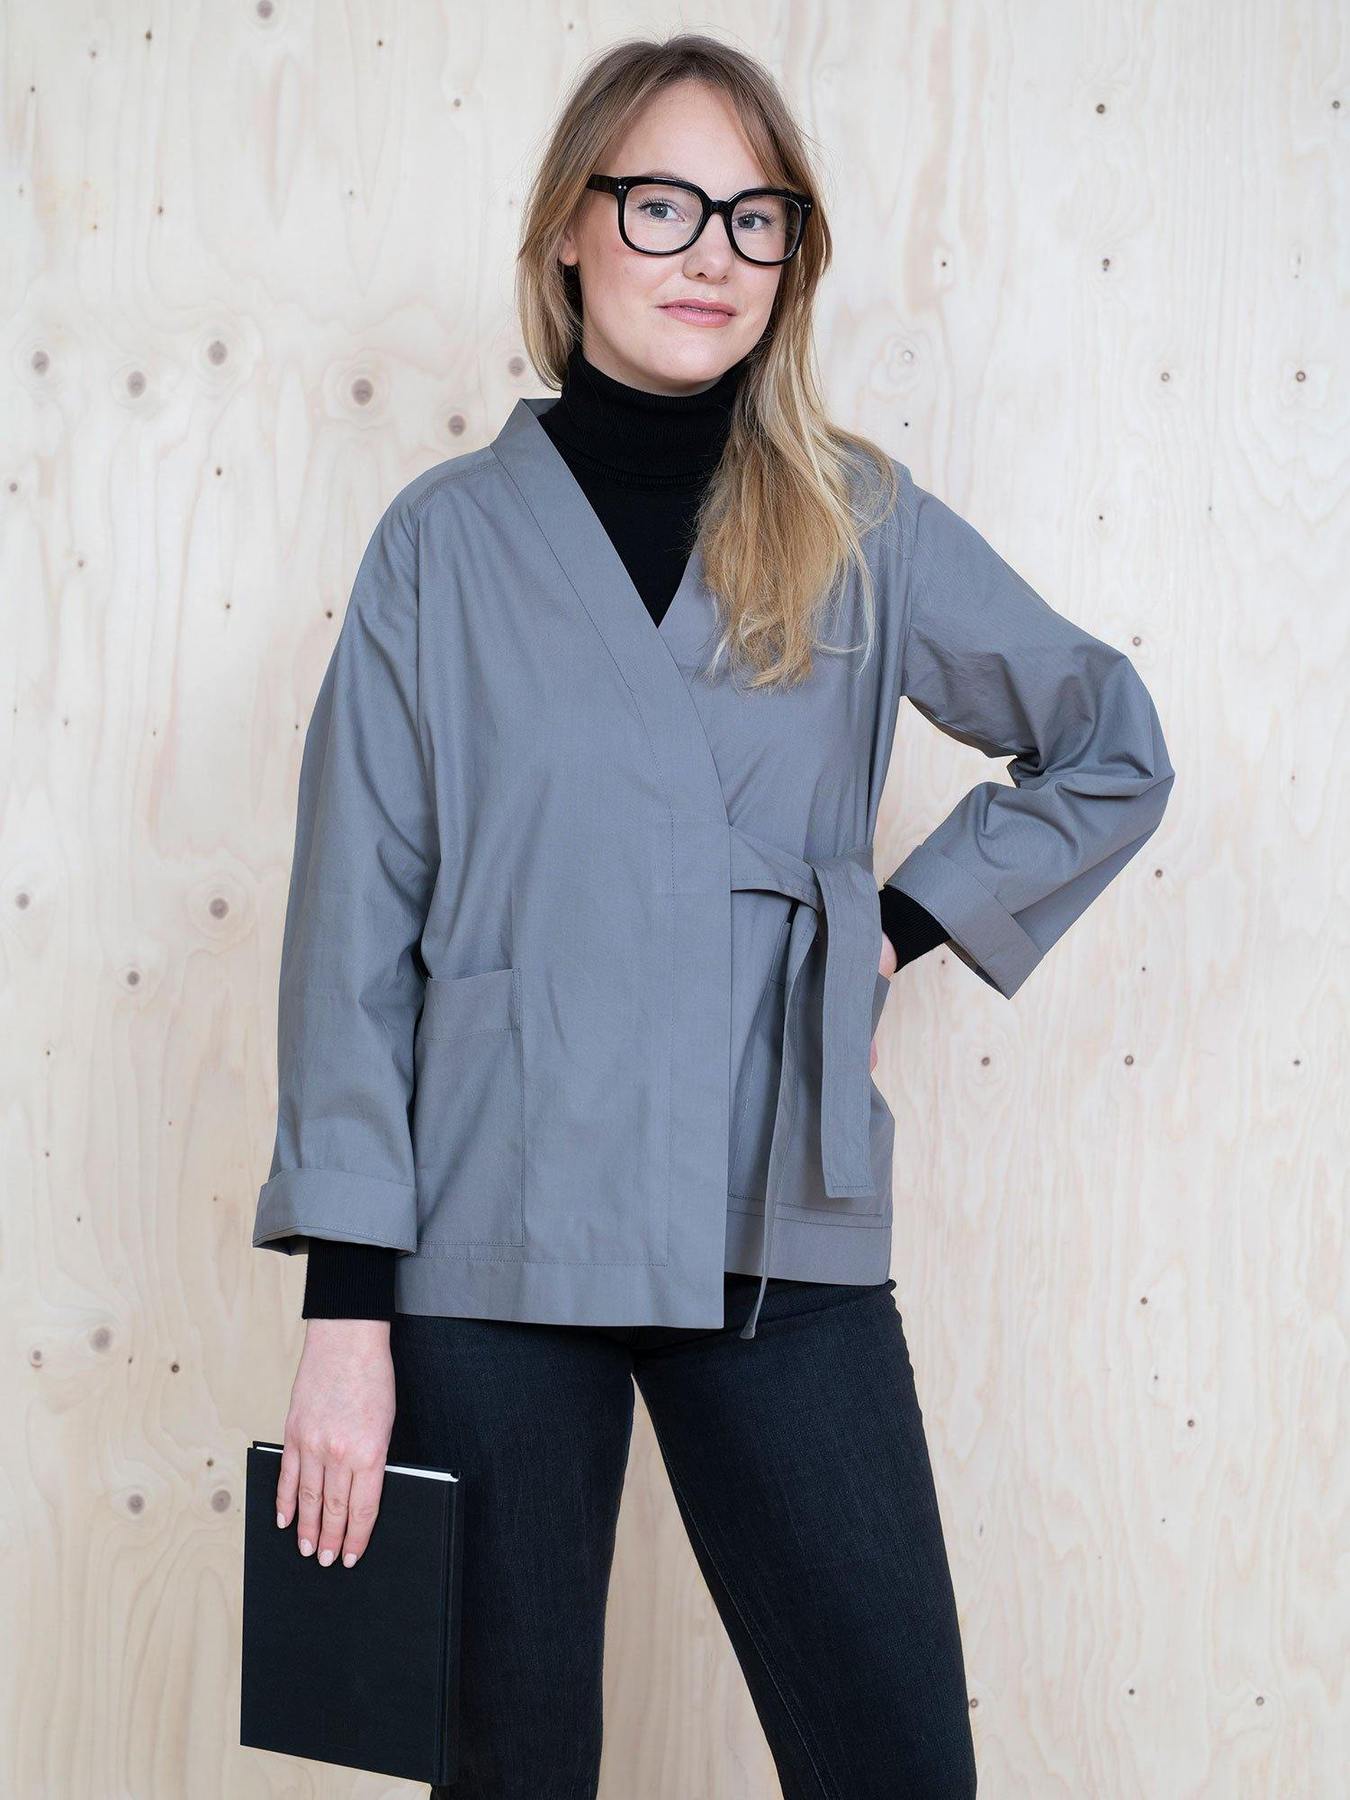 Woman wearing the Wrap Jacket sewing pattern from The Assembly Line on The Fold Line. A jacket pattern made in cotton twill, denim or lightweight canvas fabrics, featuring large pockets, full length sleeves turned back, crossover front with matching fabric tie and relaxed fit.